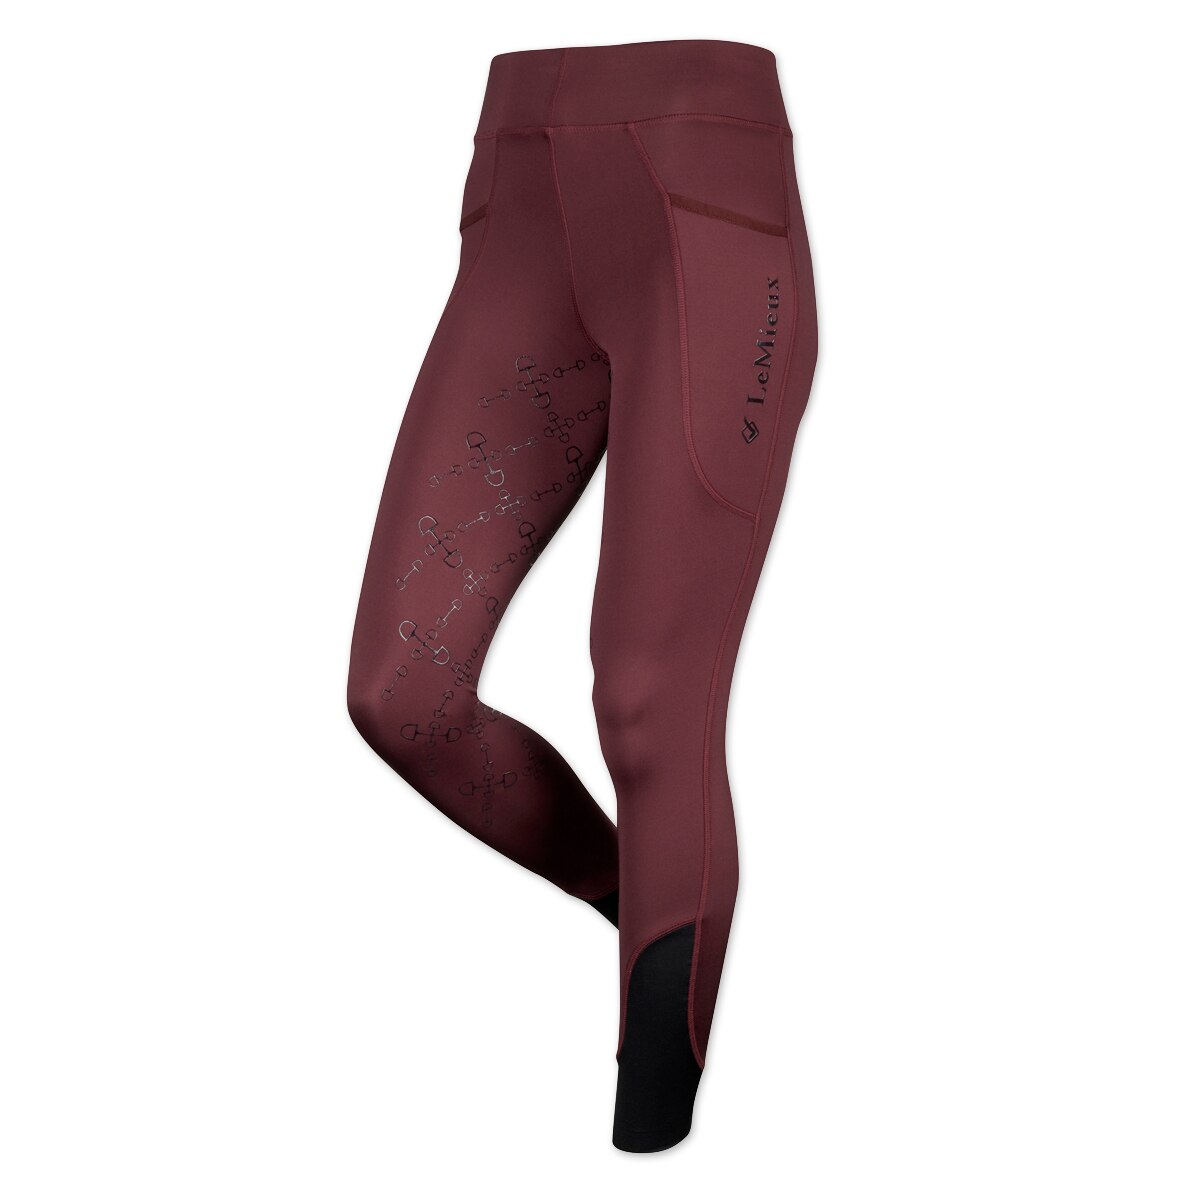 Horze Leah Women's Silicone Full Seat Riding Tights with Phone Pocket 